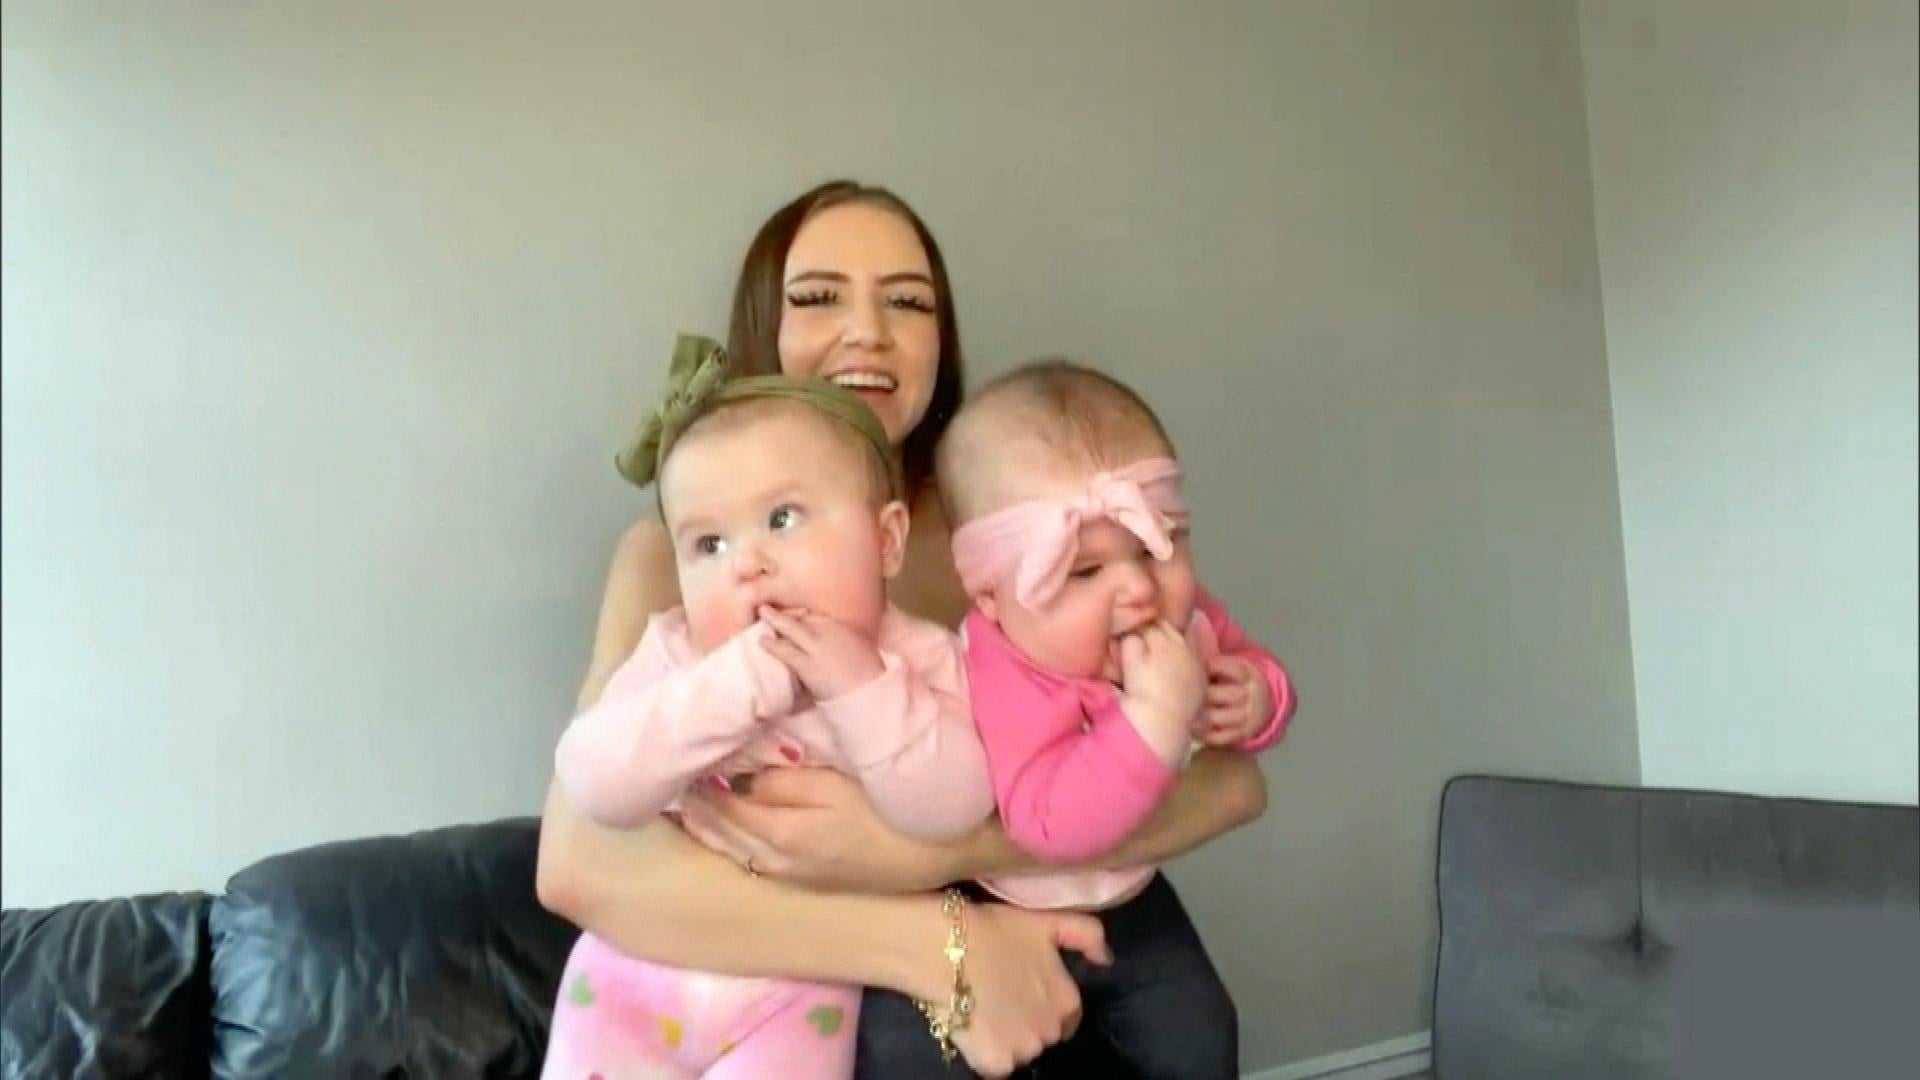 TikTok 'Tiny Mom' (from St. Paul!) and big babies go viral in a